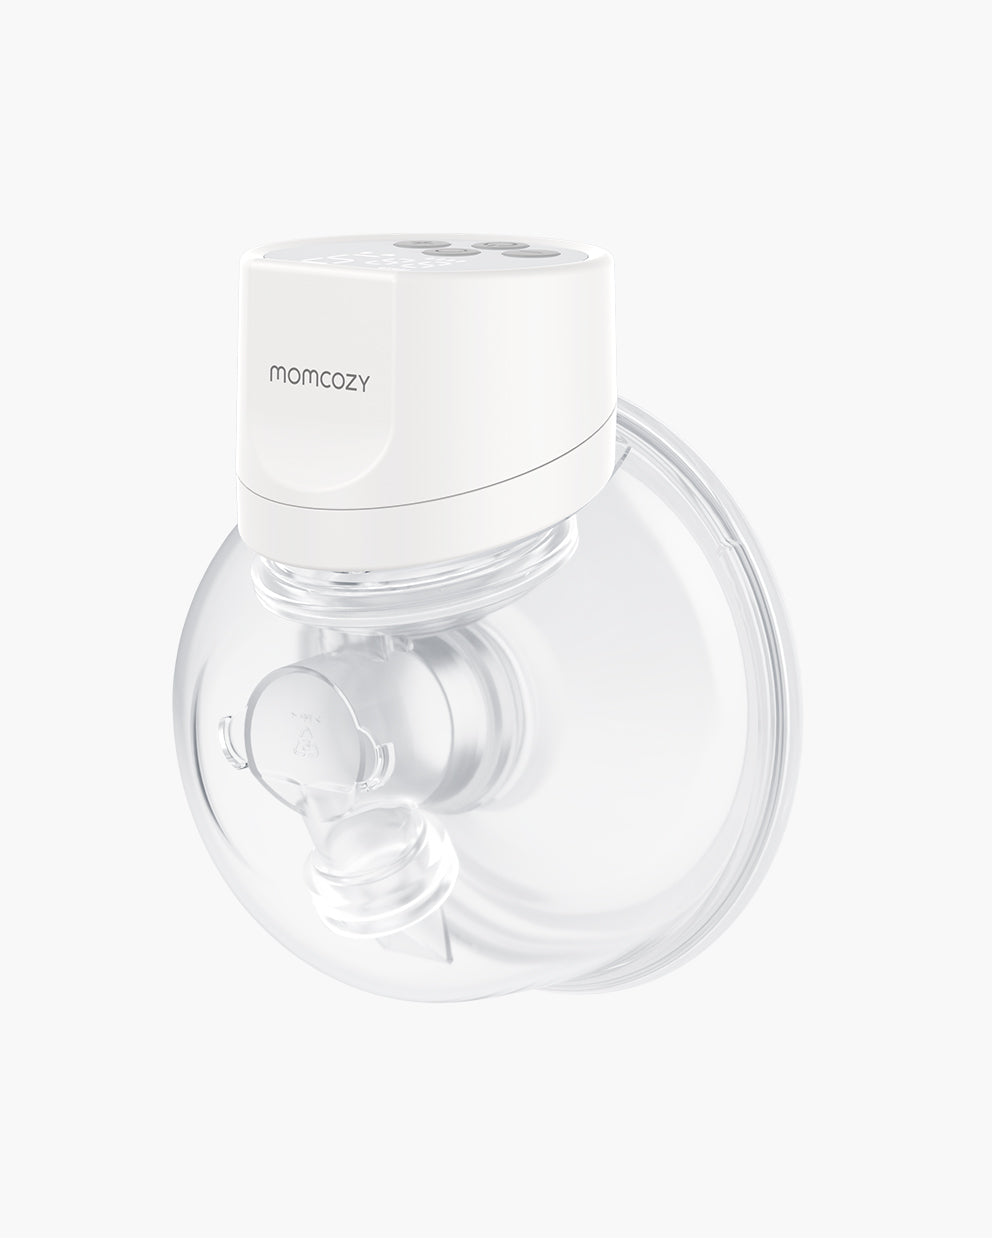 Momcozy M5 All-In-One Breast Pump - Double